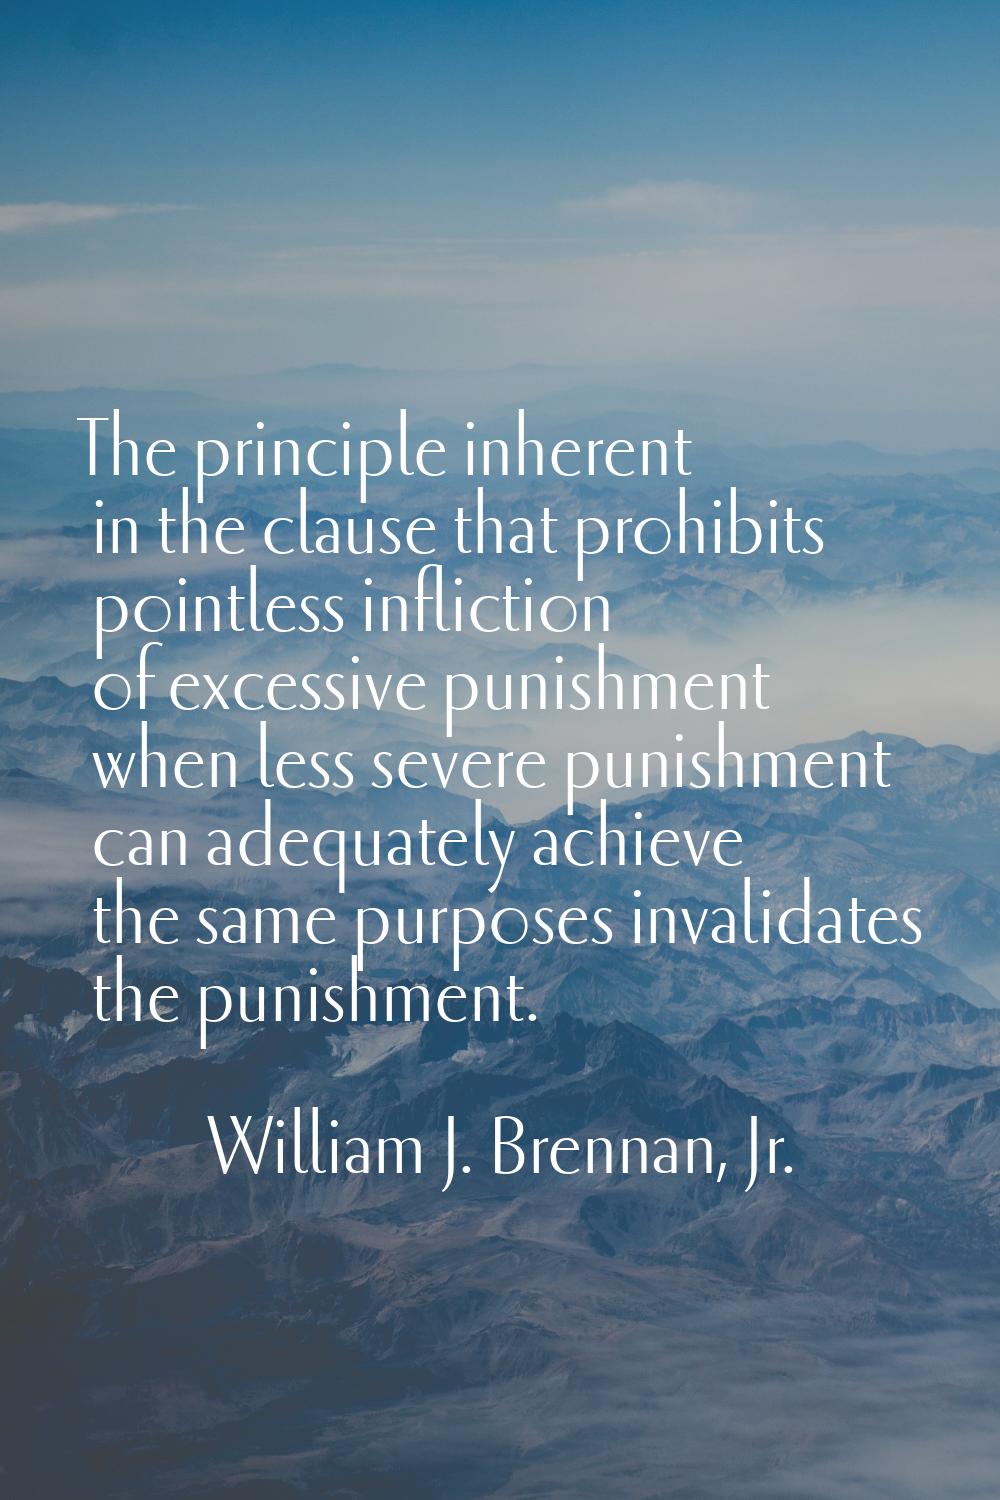 The principle inherent in the clause that prohibits pointless infliction of excessive punishment wh